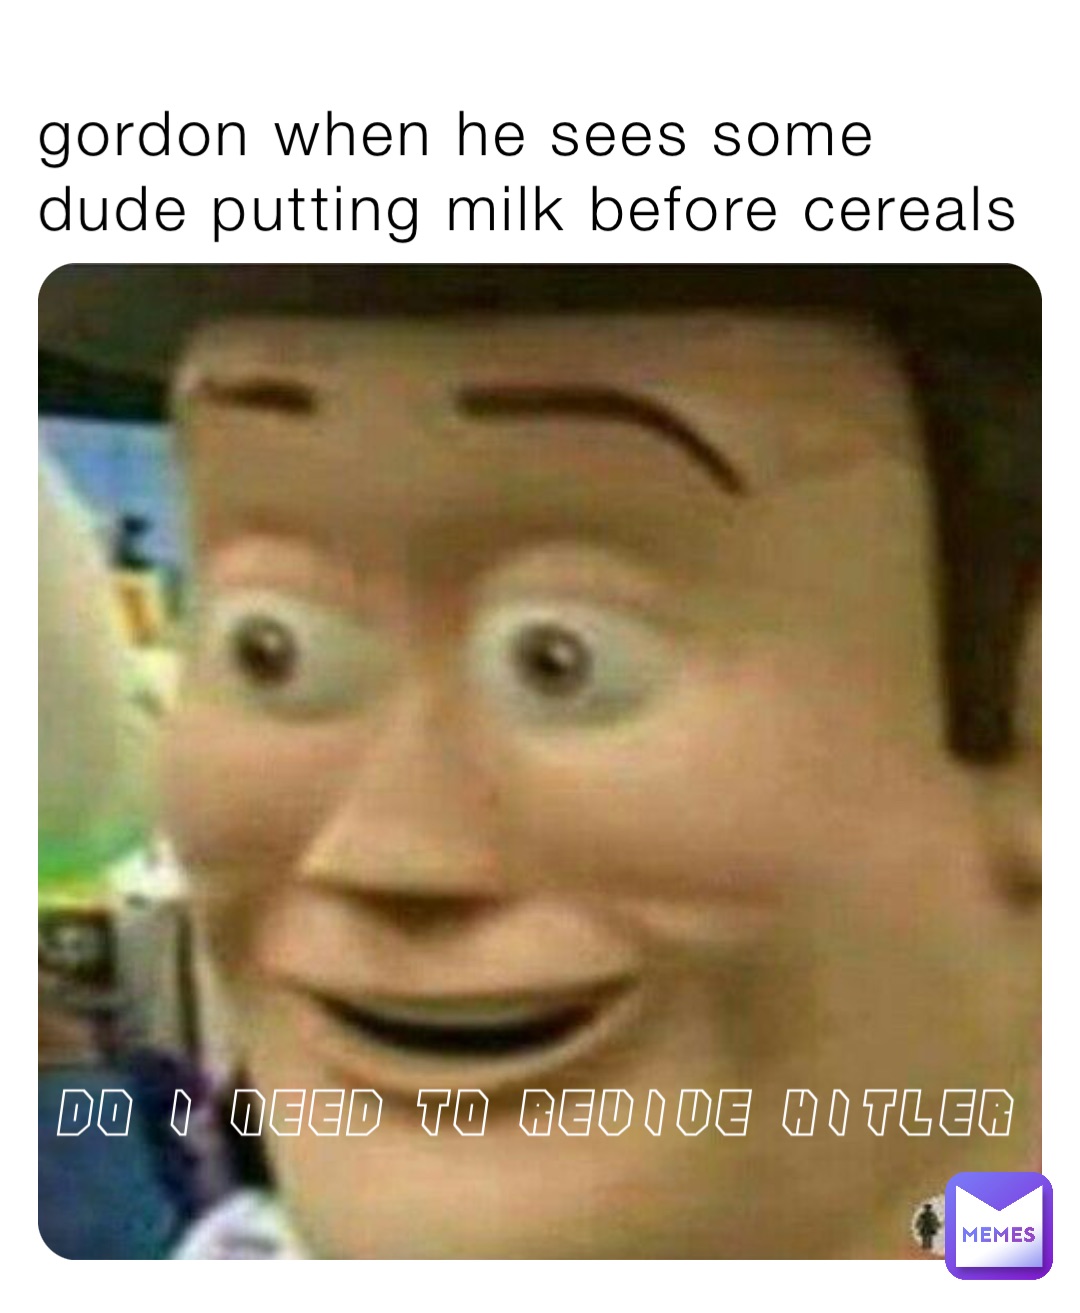 gordon when he sees some dude putting milk before cereals do i need to revive hitler